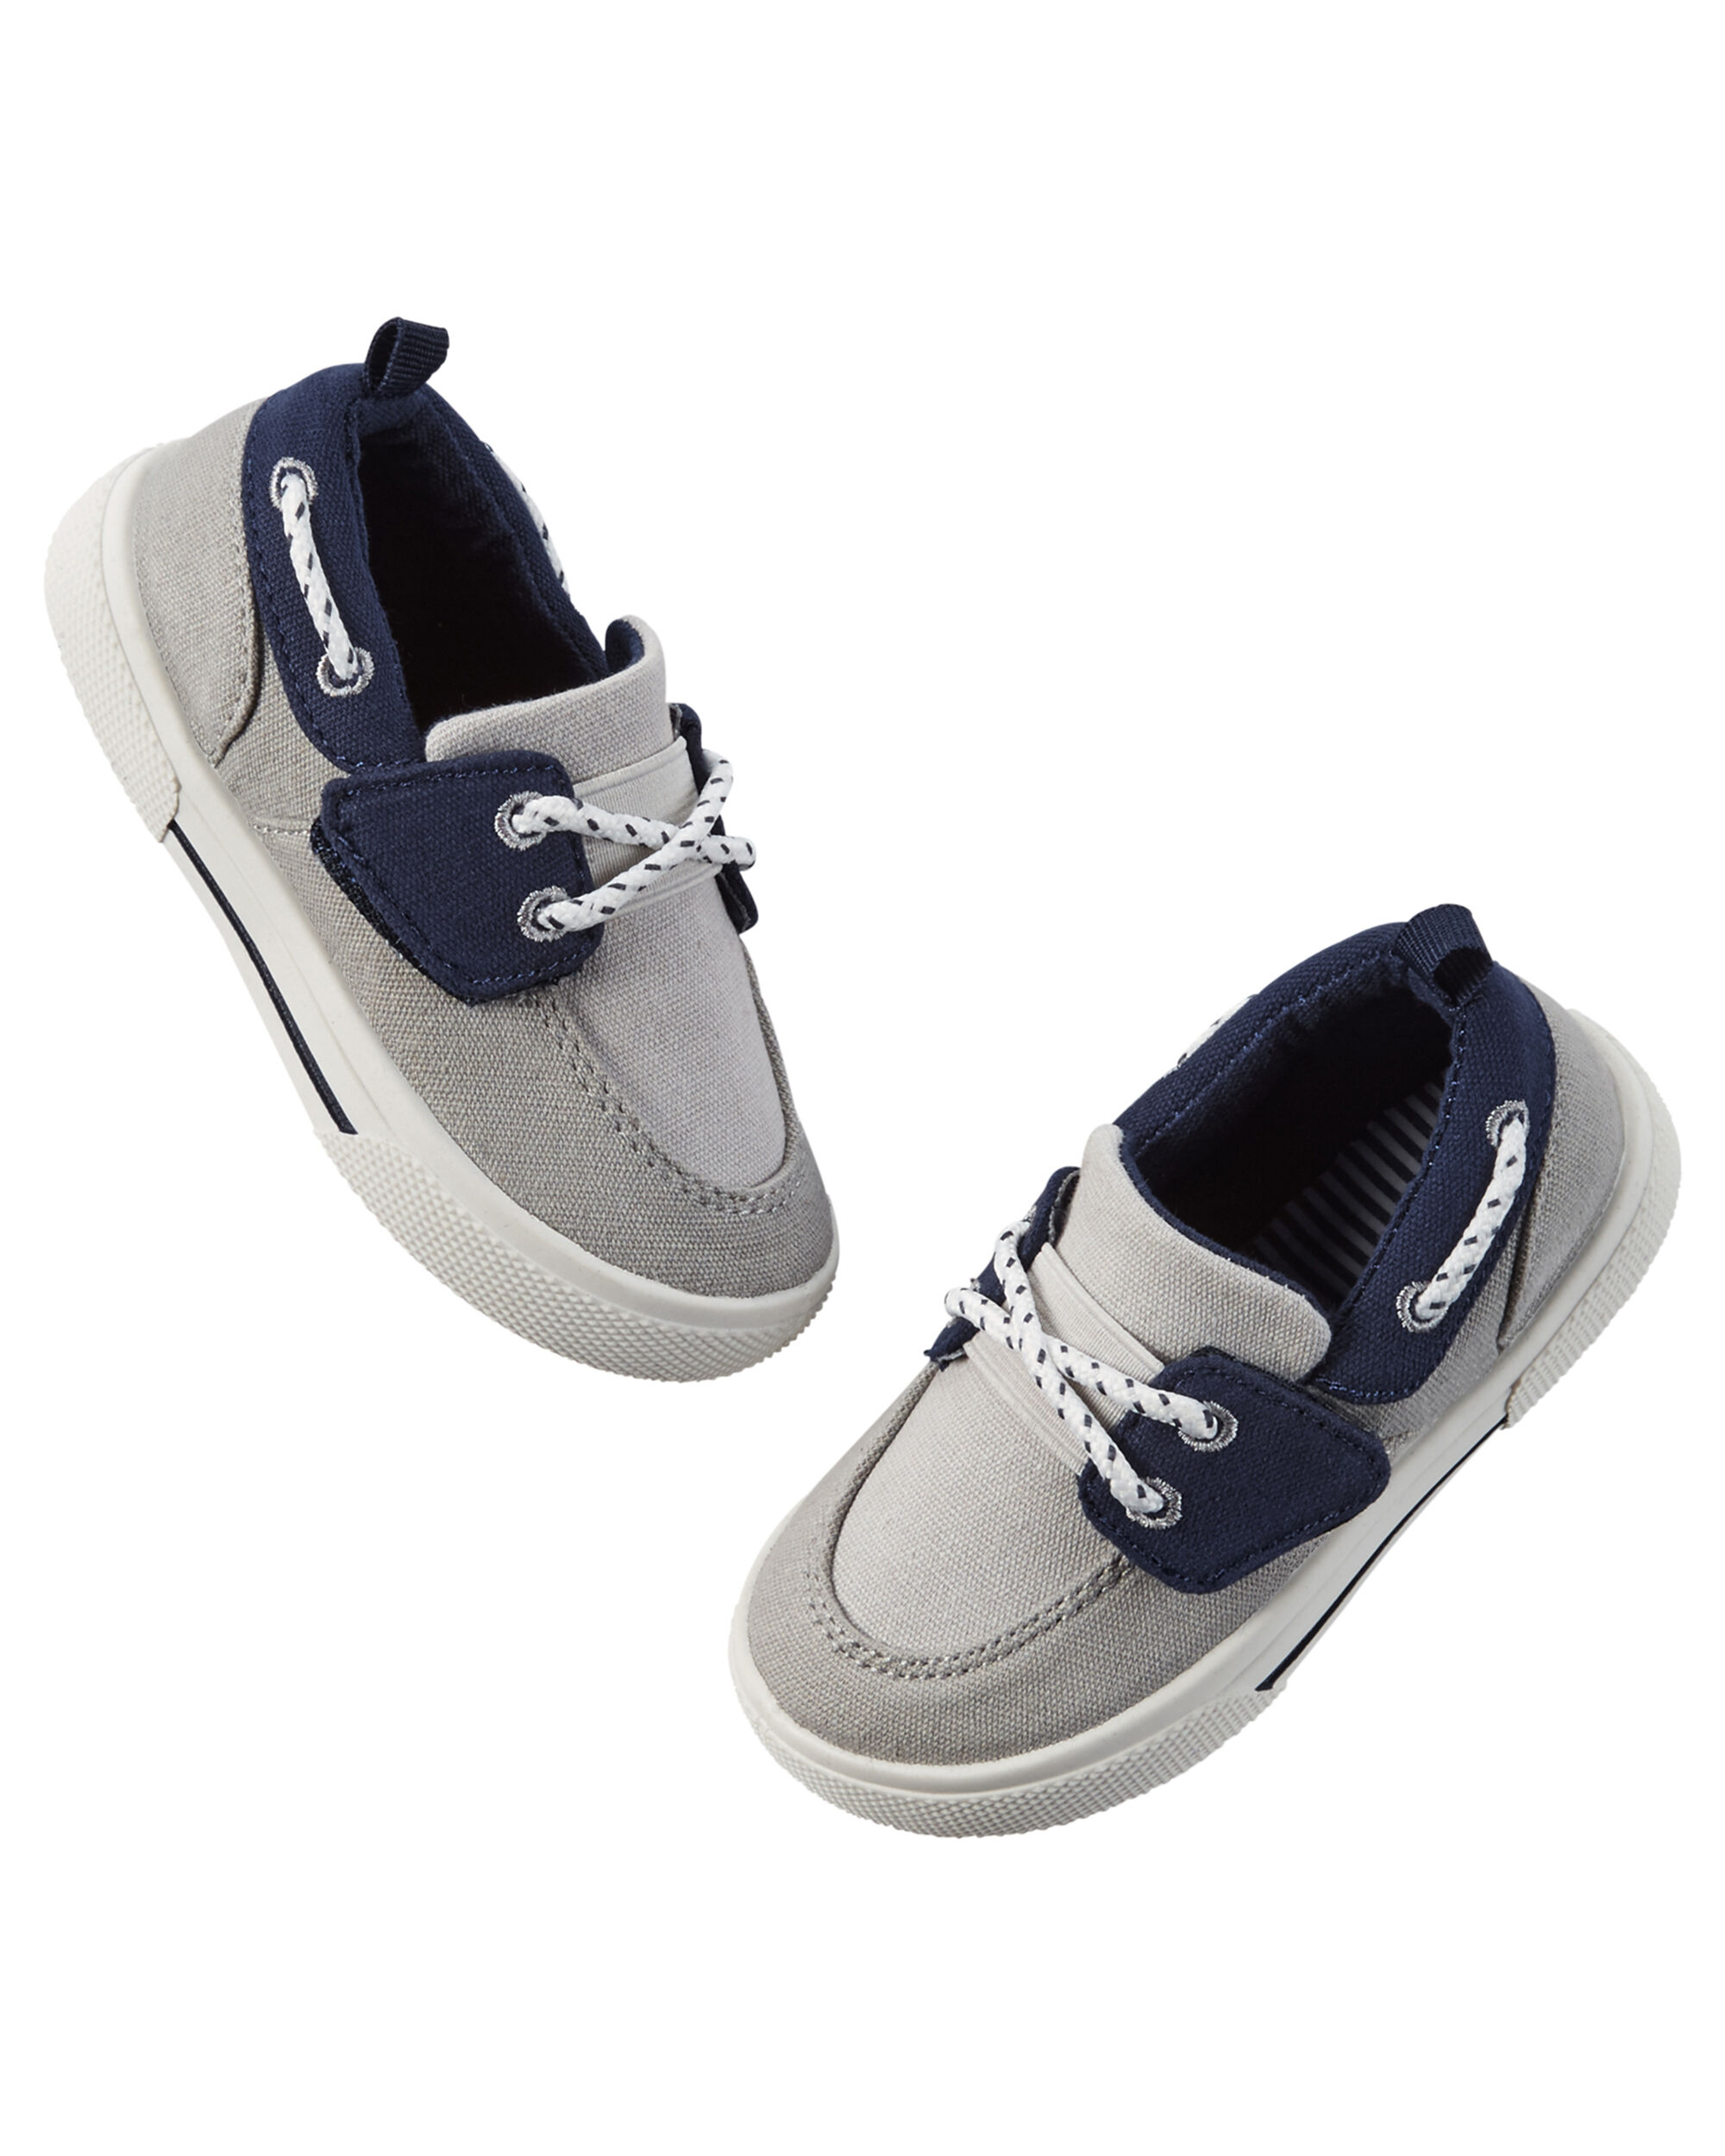 carter's boat shoes